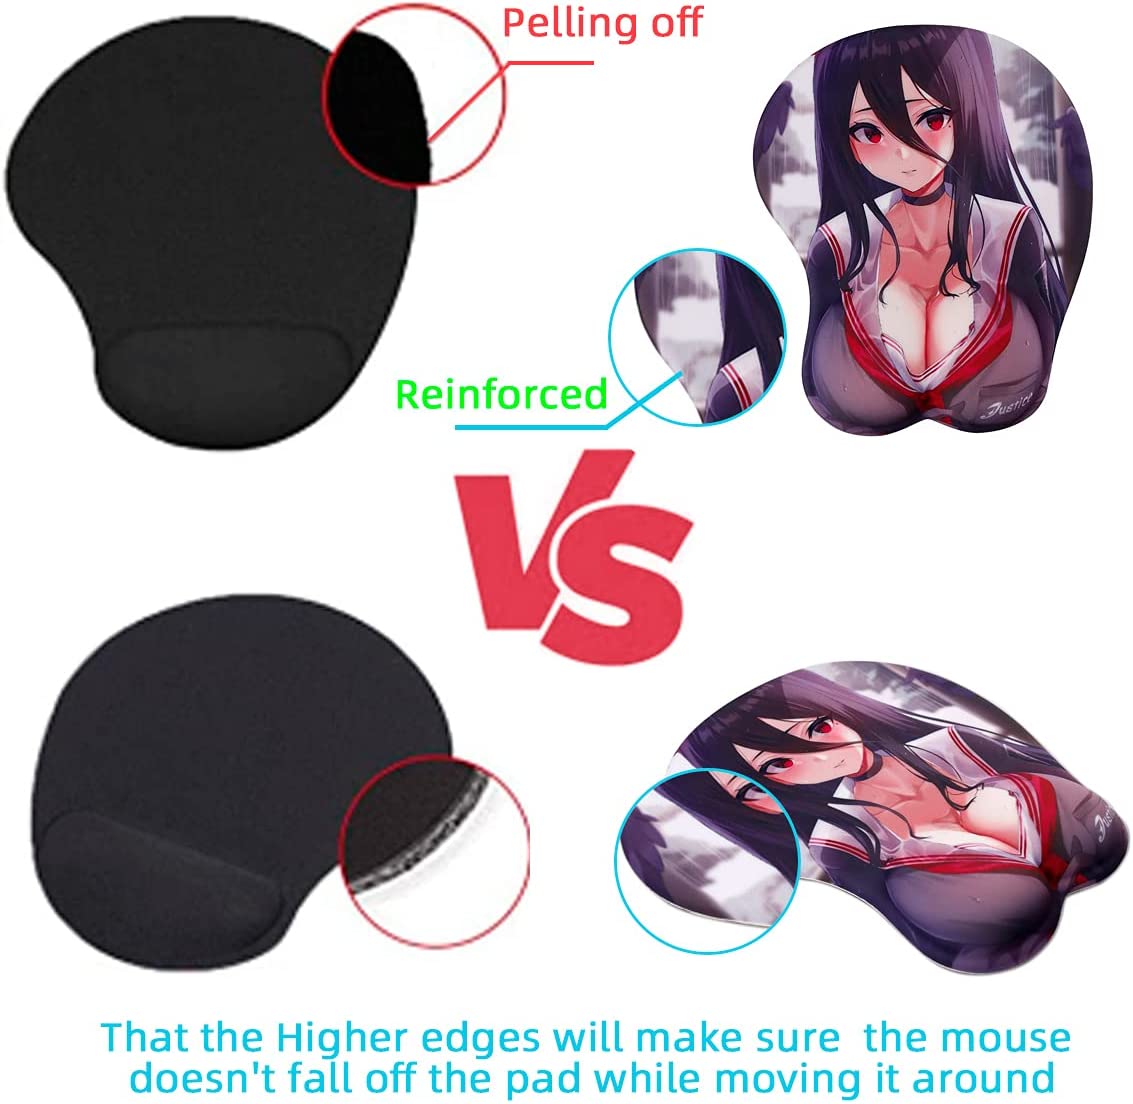 3D Anime Beautiful Girl Beauty Wrist Support Mousepad - Cartoon Non-Slip Gaming Mouse Pads, Silicone Anime Cute Girl Mouse Mat for Computer,Laptop-Classical Beauty - image 3 of 6